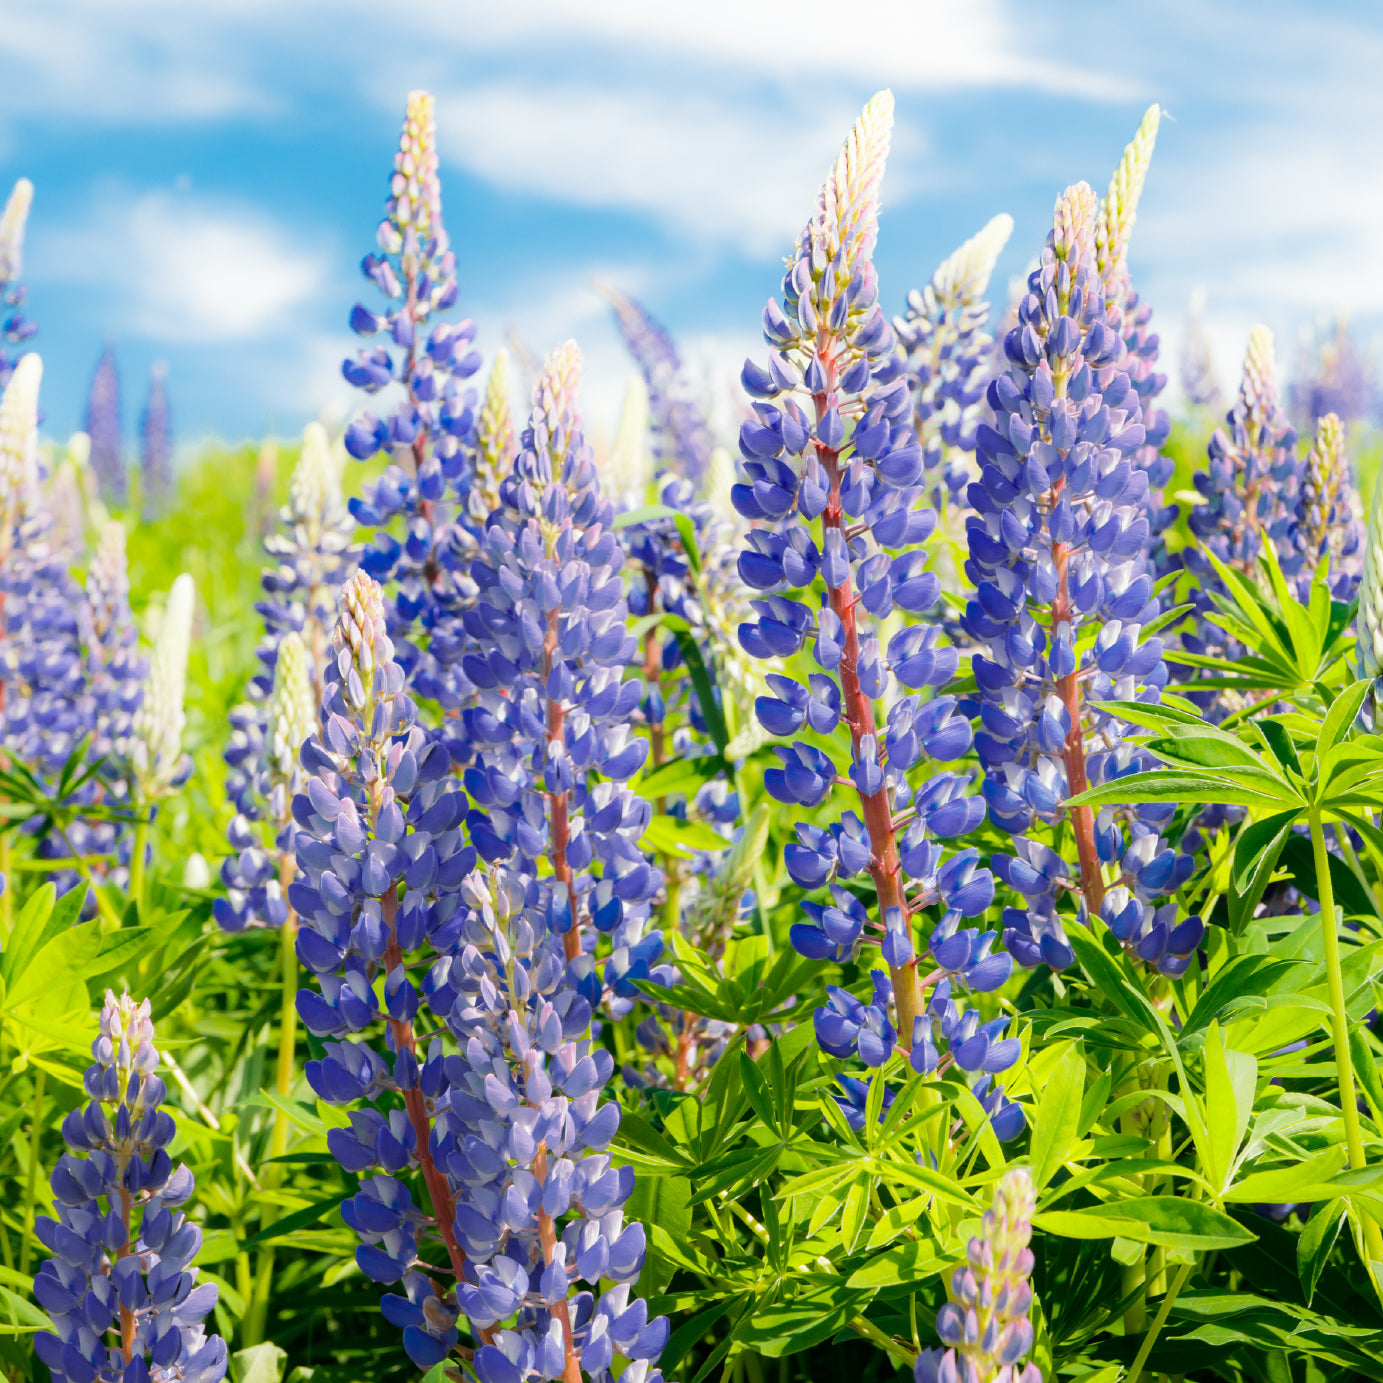 Lupine flowers in the Georgia wildflower seed mix